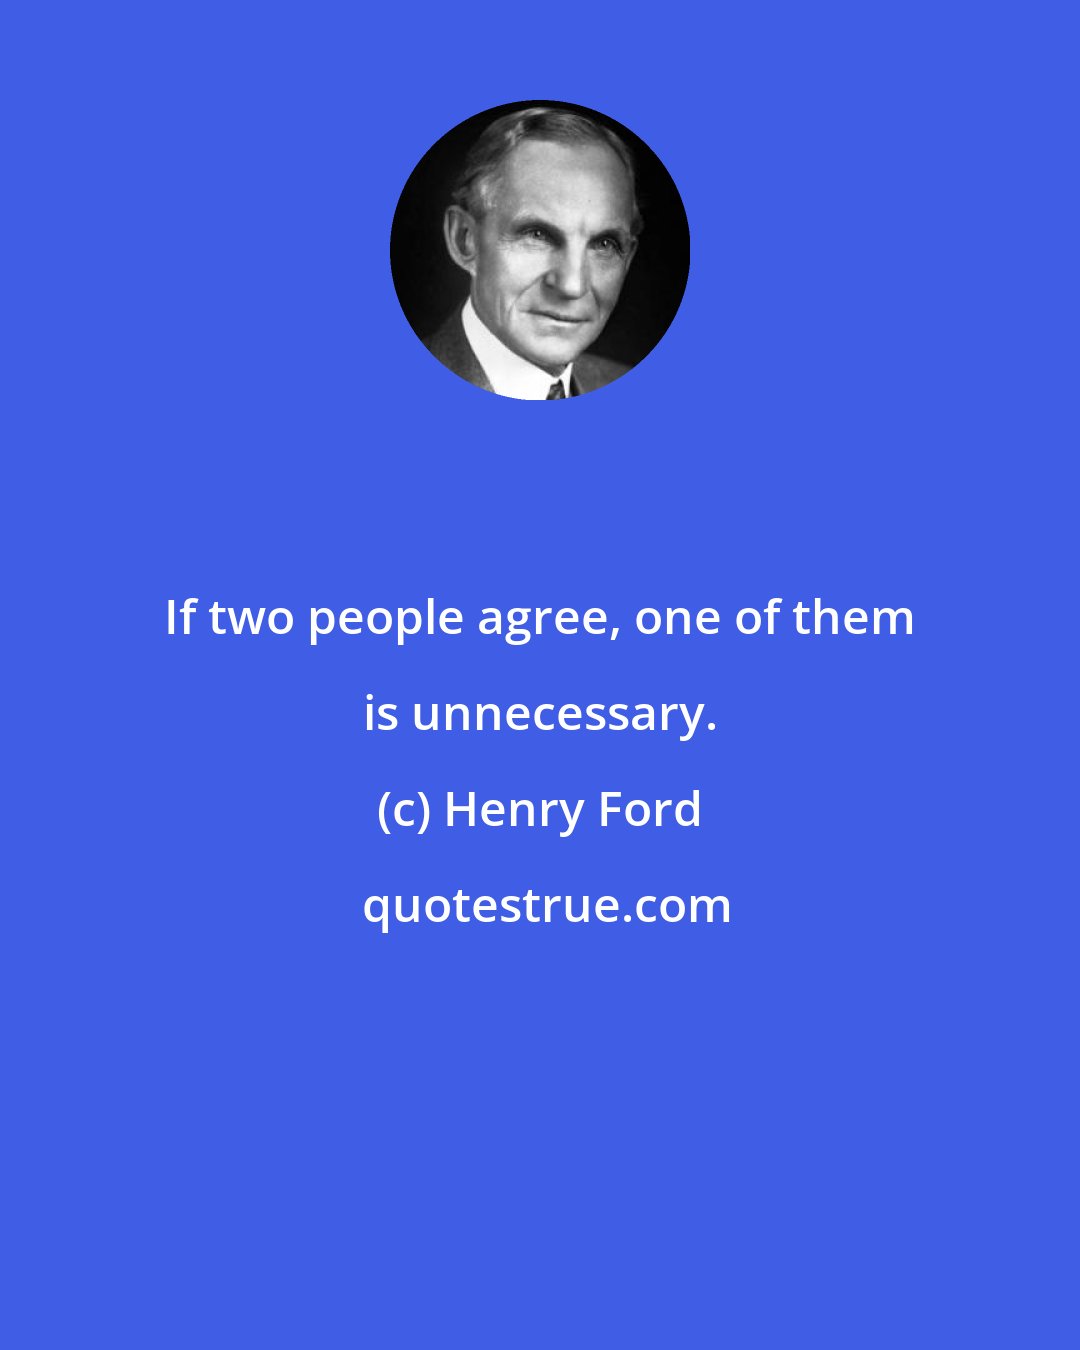 Henry Ford: If two people agree, one of them is unnecessary.